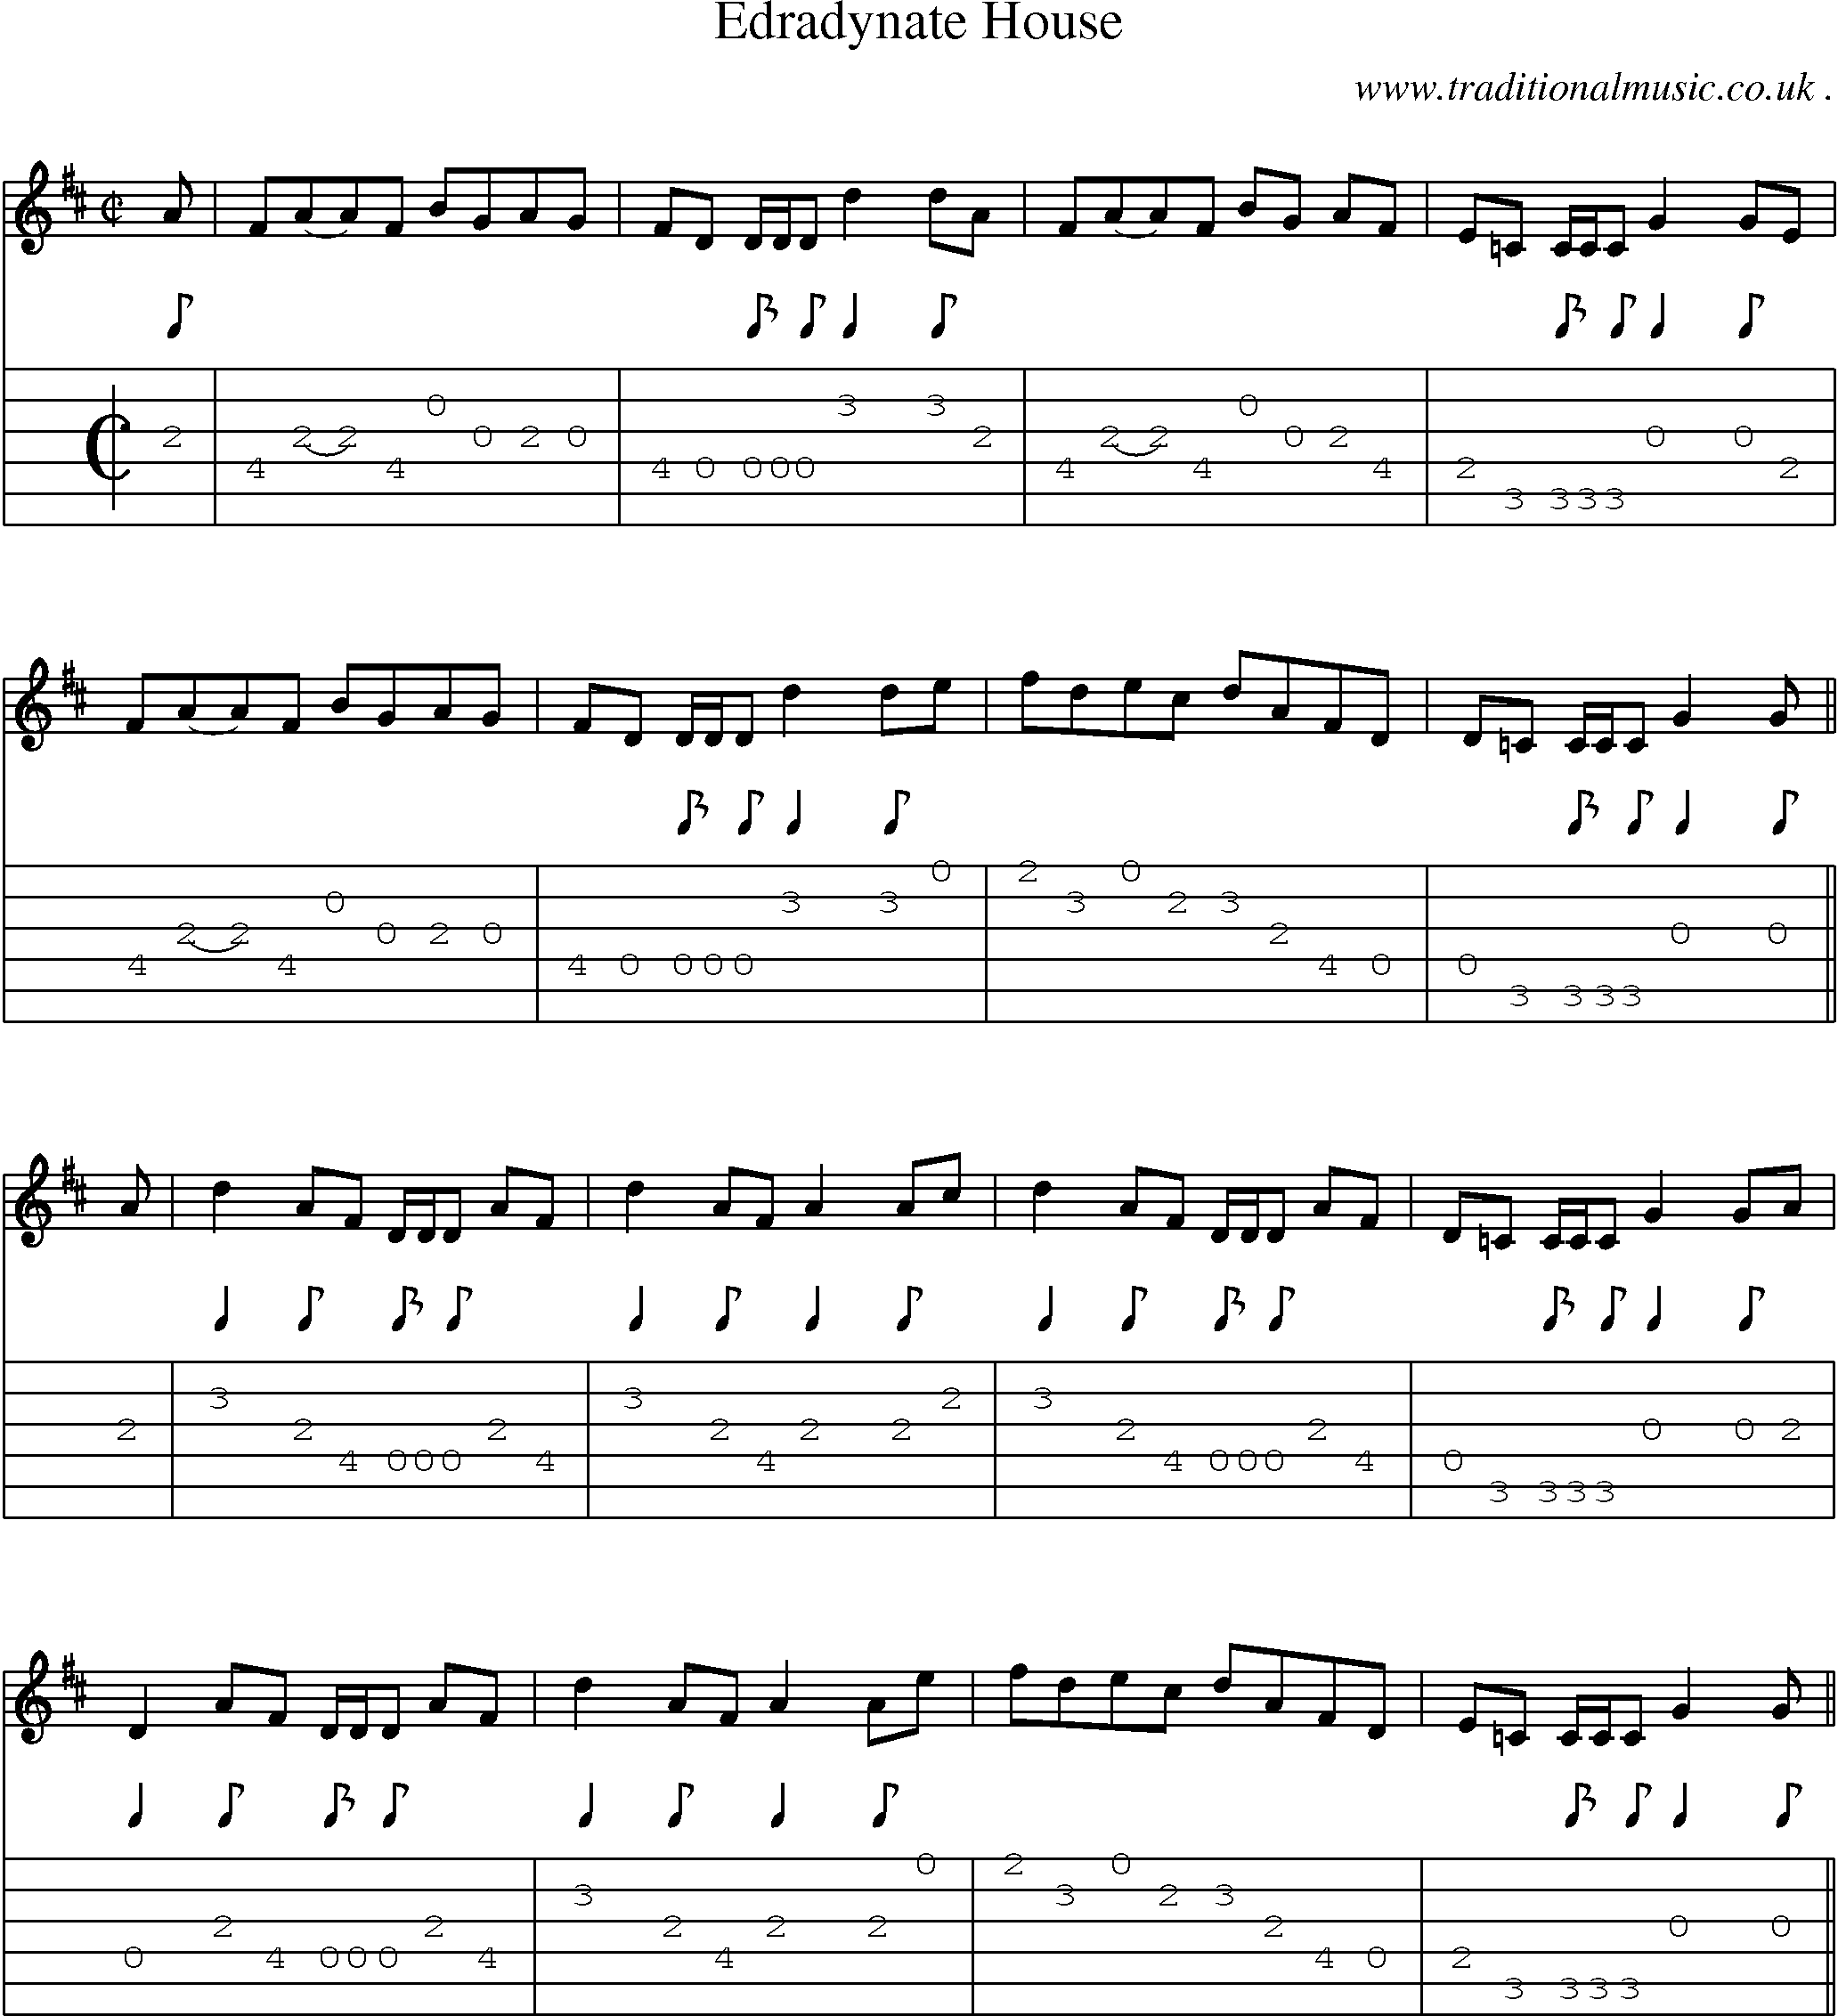 Sheet-music  score, Chords and Guitar Tabs for Edradynate House